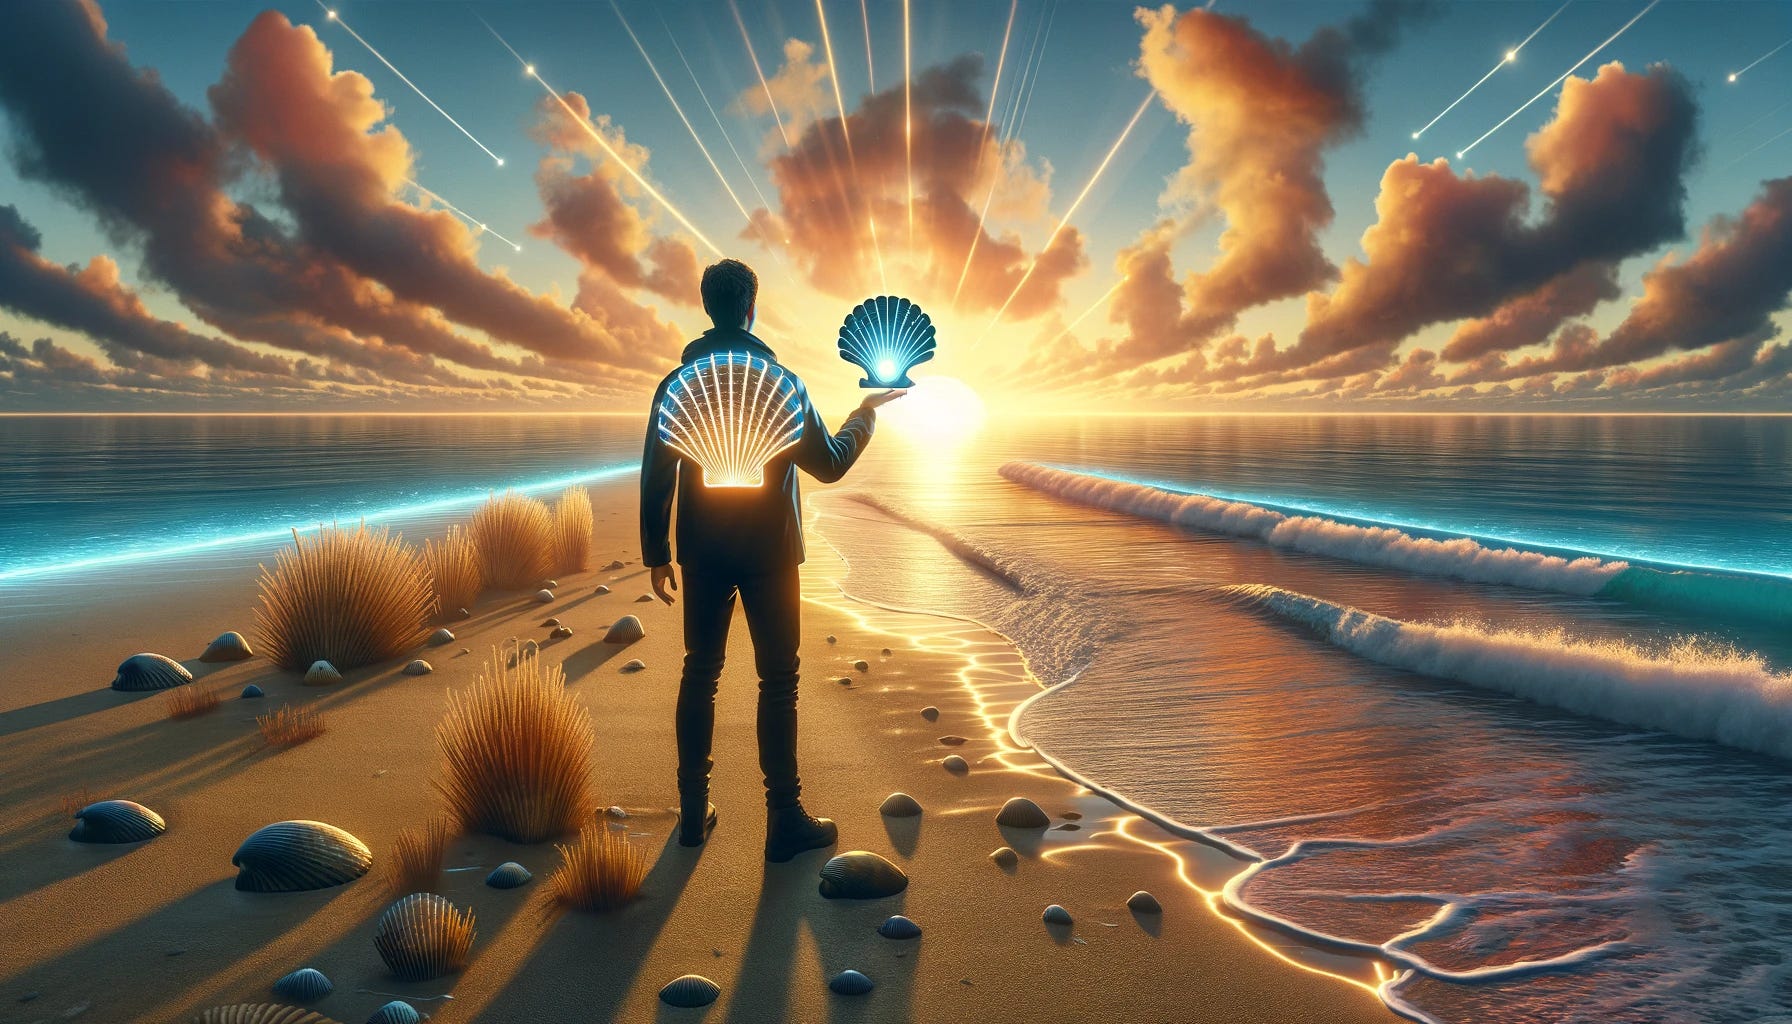 An illustrative image that captures the essence of the title 'The Advantages of Being an Early Adopter with Scallop'. The scene depicts a person standing on a beach at sunrise, looking towards the horizon with a sense of anticipation and opportunity. In one hand, they hold a glowing, futuristic device shaped like a scallop shell, symbolizing innovation and the benefits of embracing new technologies early. The other hand is raised towards the rising sun, signifying optimism and the forward-looking attitude of early adopters. The beach and the ocean represent uncharted territories and the vast possibilities that lie ahead for those willing to explore them. This image blends the natural beauty of the dawn with the metaphor of technological exploration and discovery.